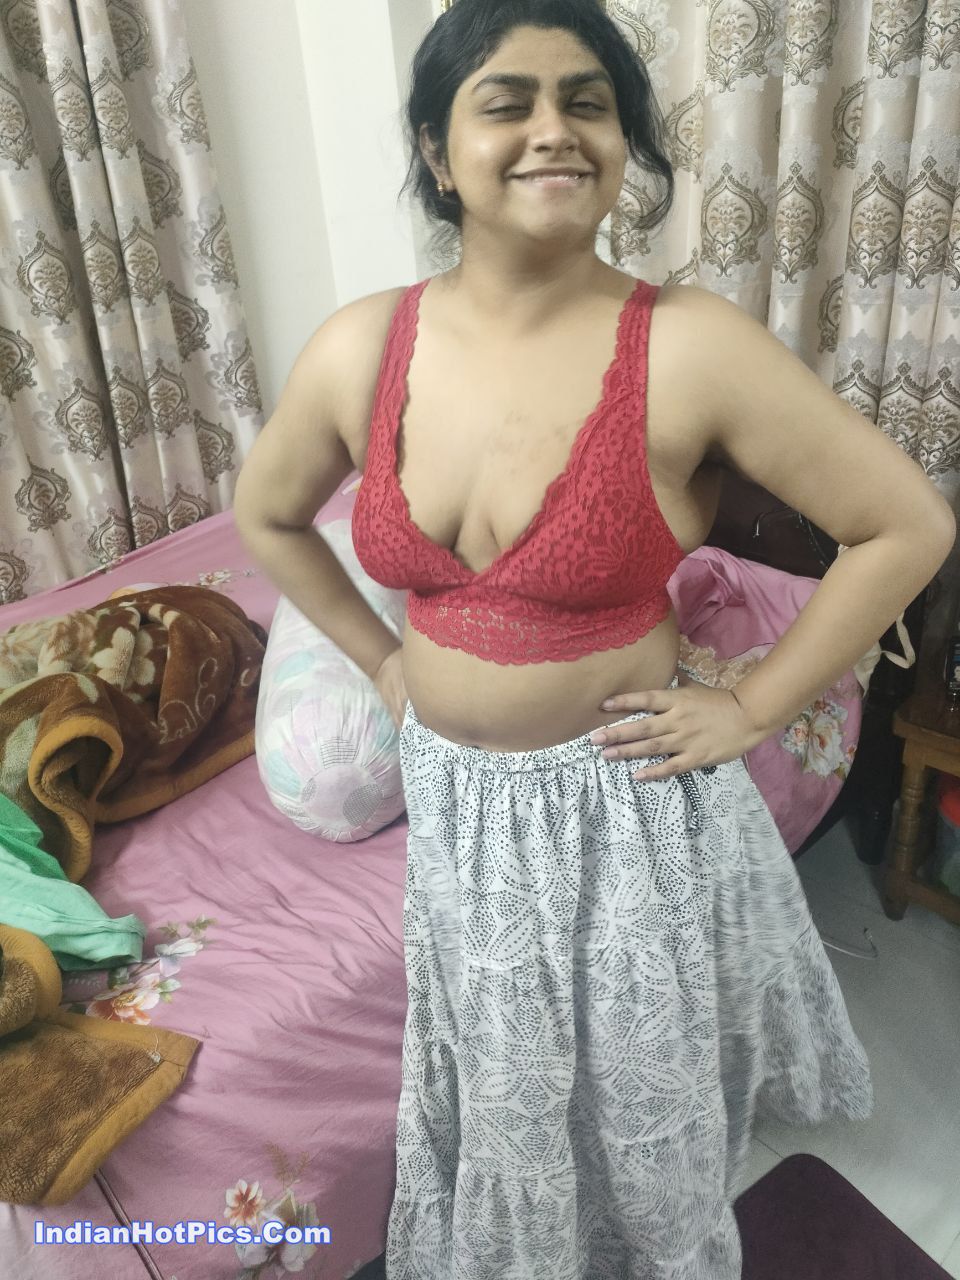 Indian Wife Nude And Sex Honeymoon Photos picture